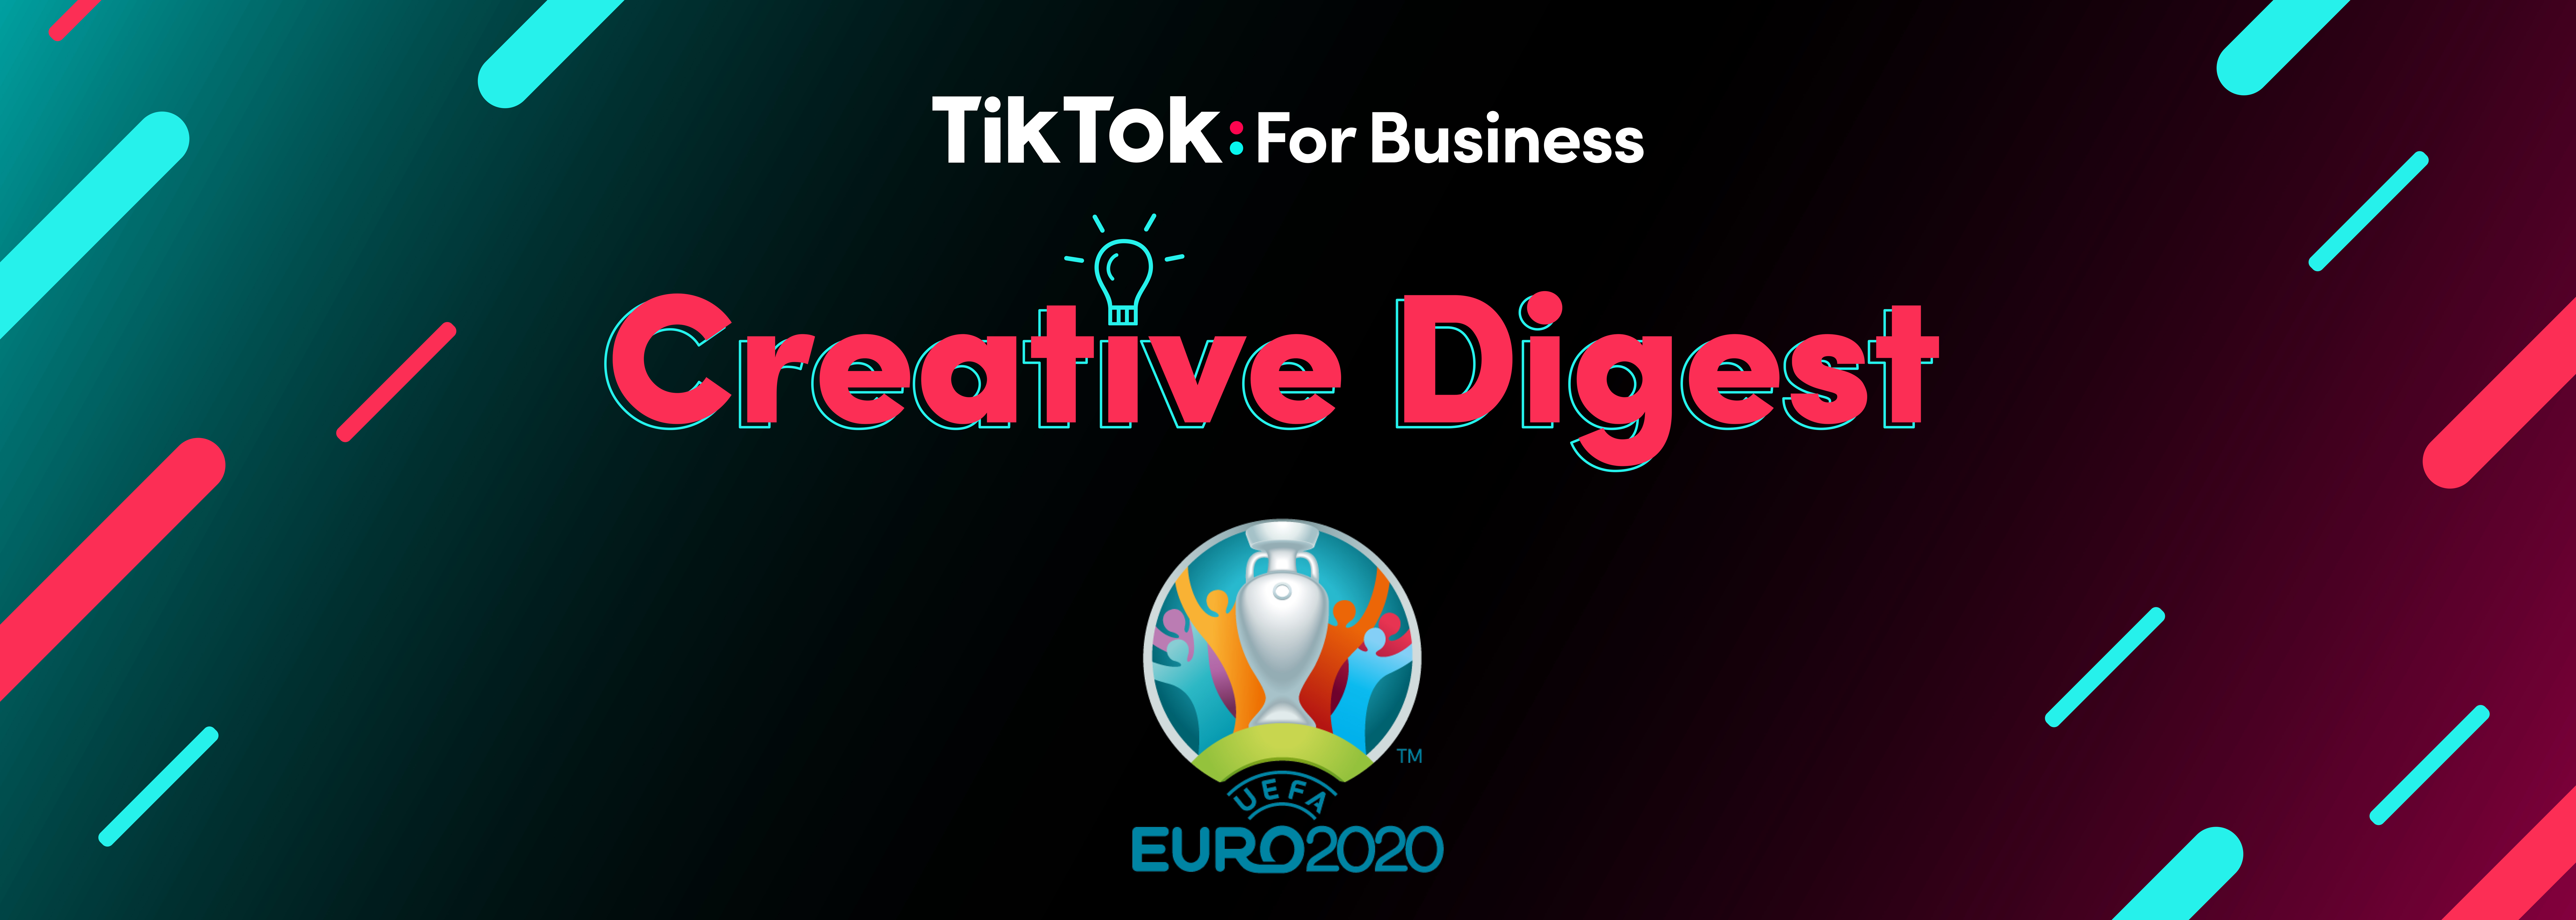 IMAGE the-tiktok-creative-digest-combining-the-regions-love-for-football-and-creativity-for-a-winning-formula